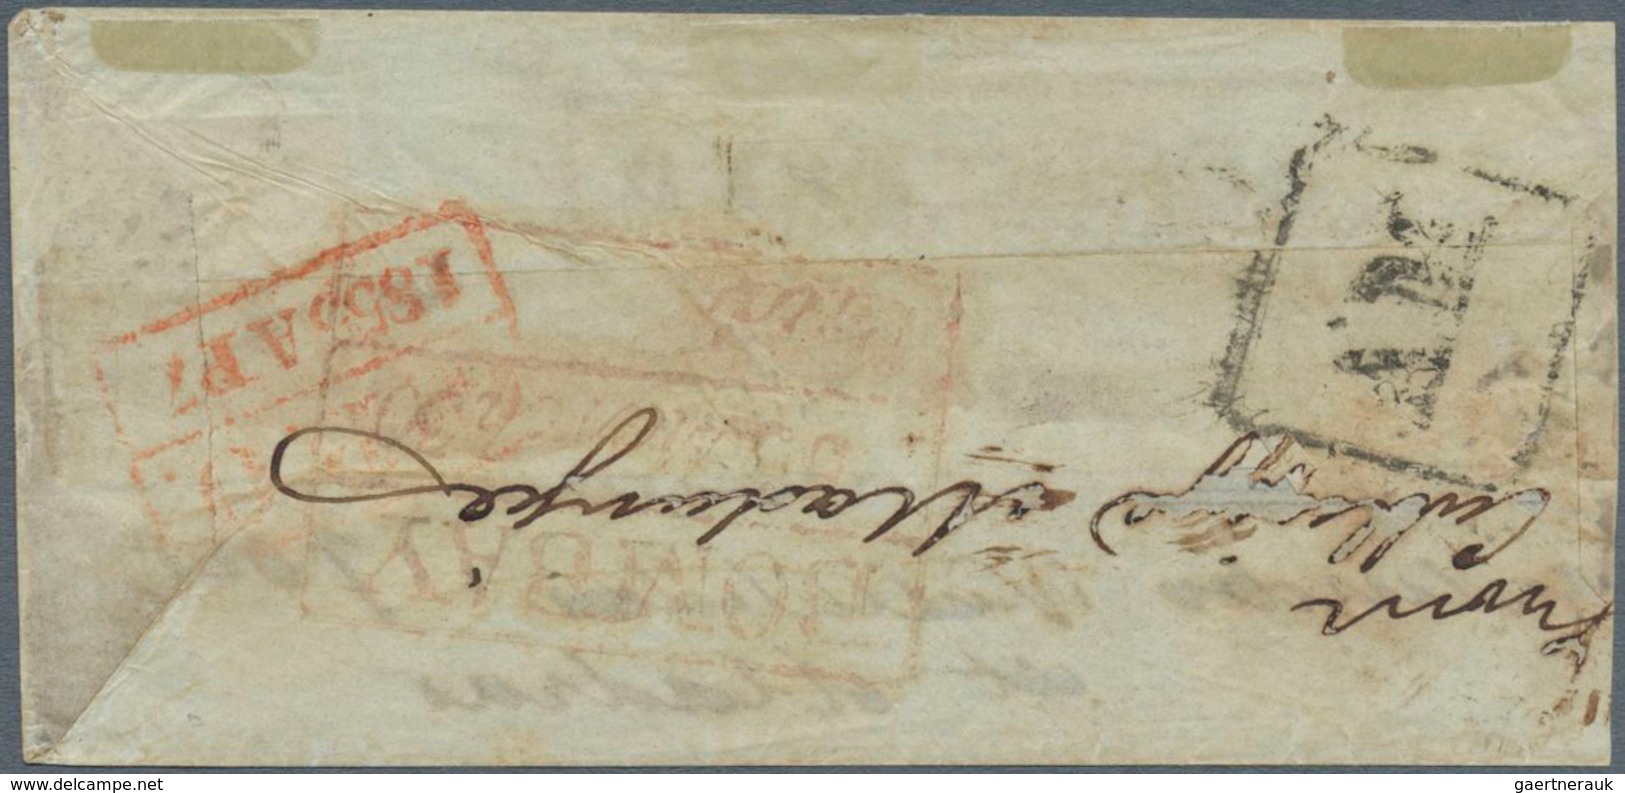 Indien: 1855 REGISTERED Cover From Bombay To Madras Franked By Lithographed 1a. Pale Red, Die II, Ti - 1852 Provinz Von Sind